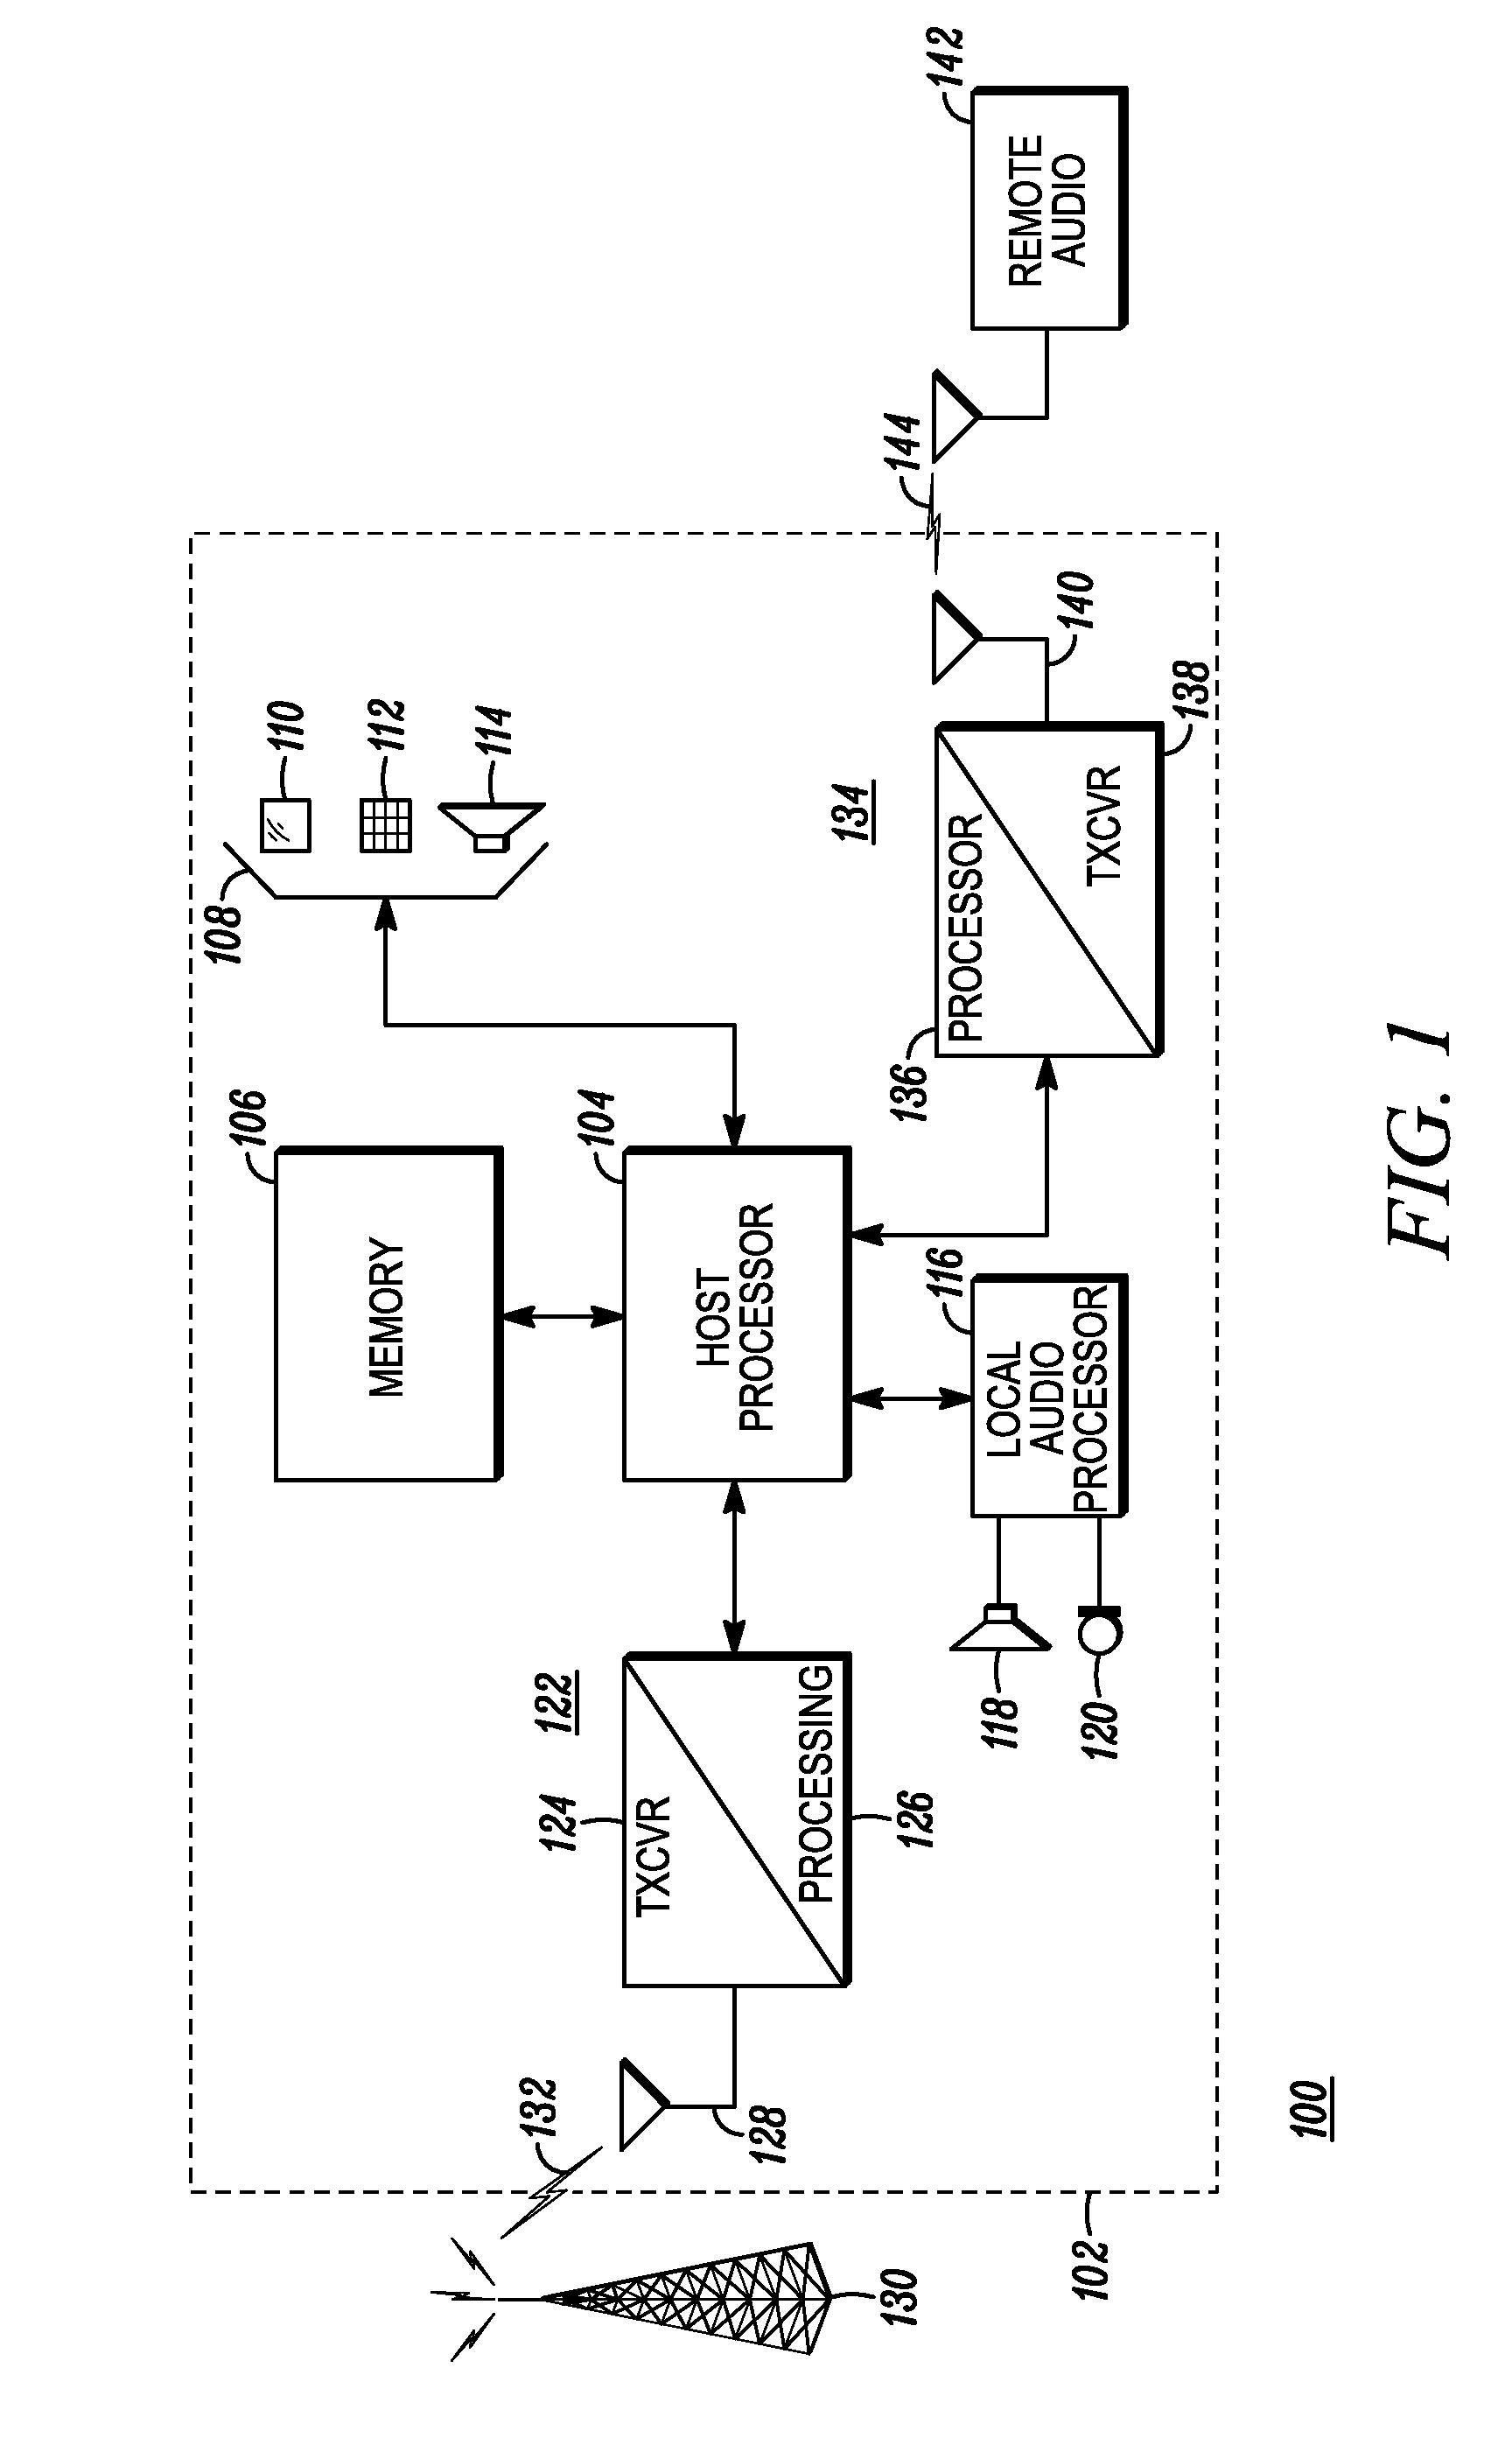 Method for operating a wide area network modem and a personal area network modem in a mobile communication device